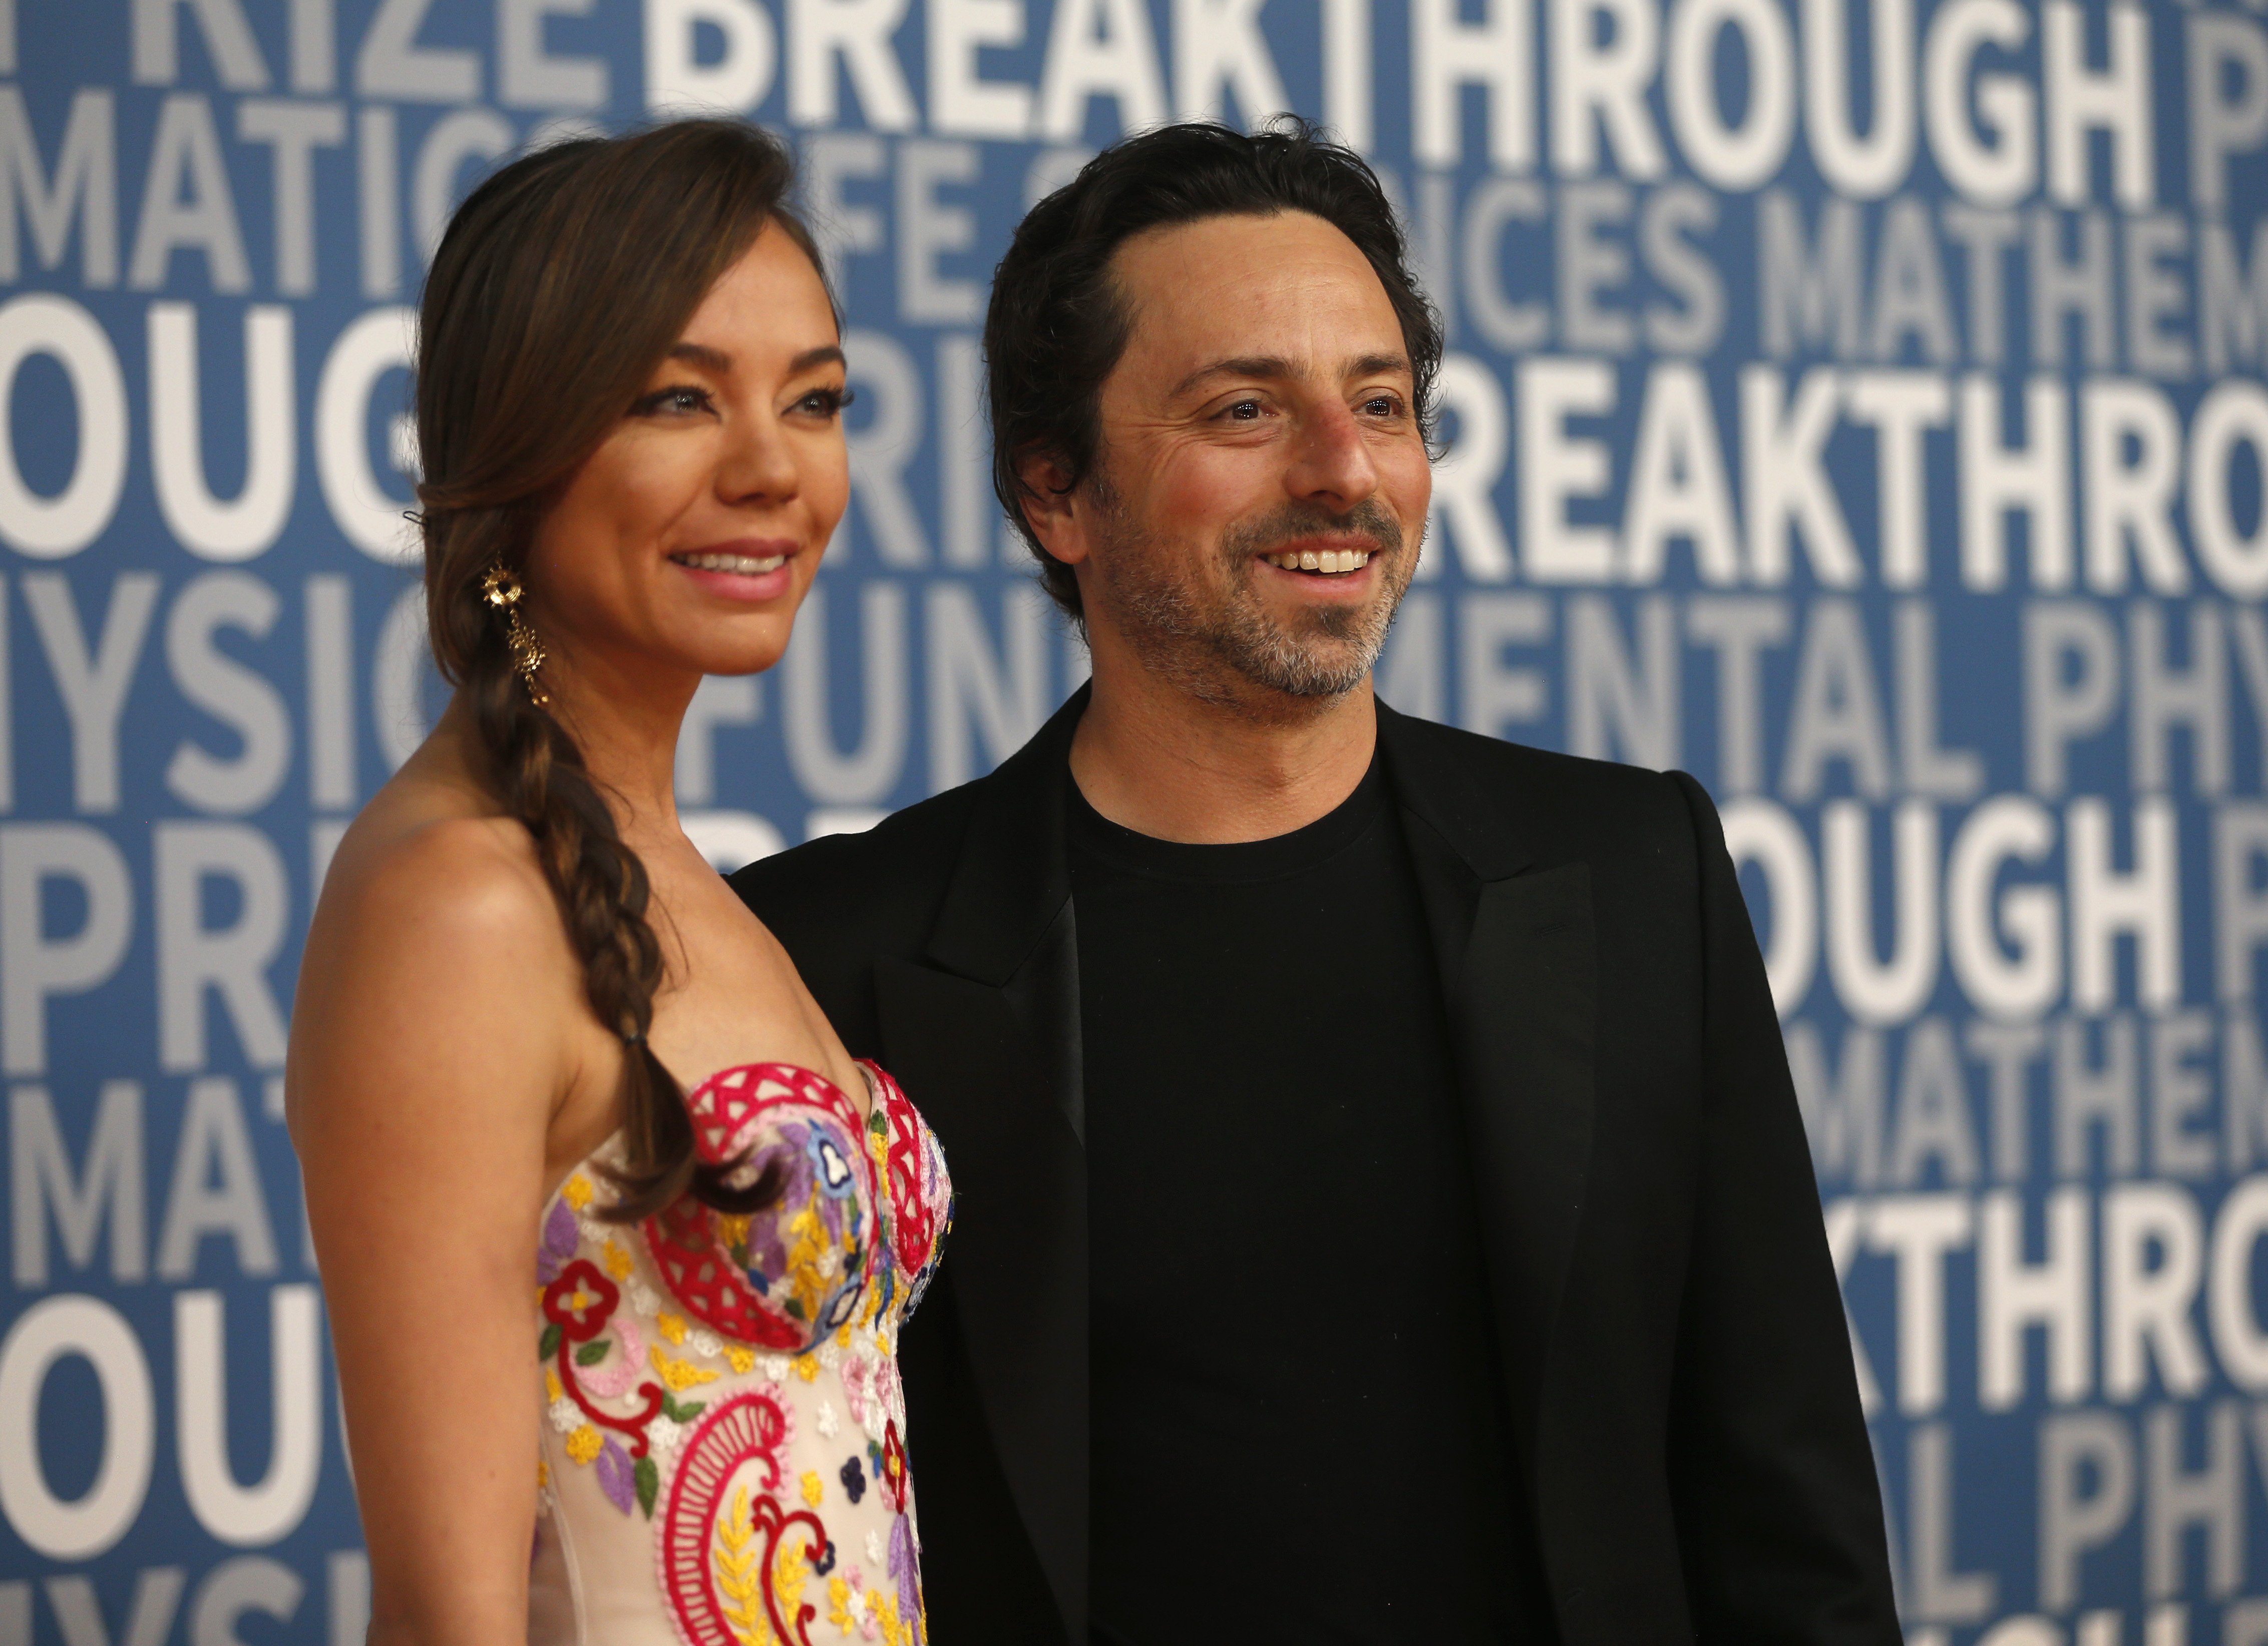 Sergi Brin and Nicole Shanahan attend the Breakthrough Prize ceremony at Moffett Airfield on December 4, 2016, in Mountain View, California. | Source: Getty Images